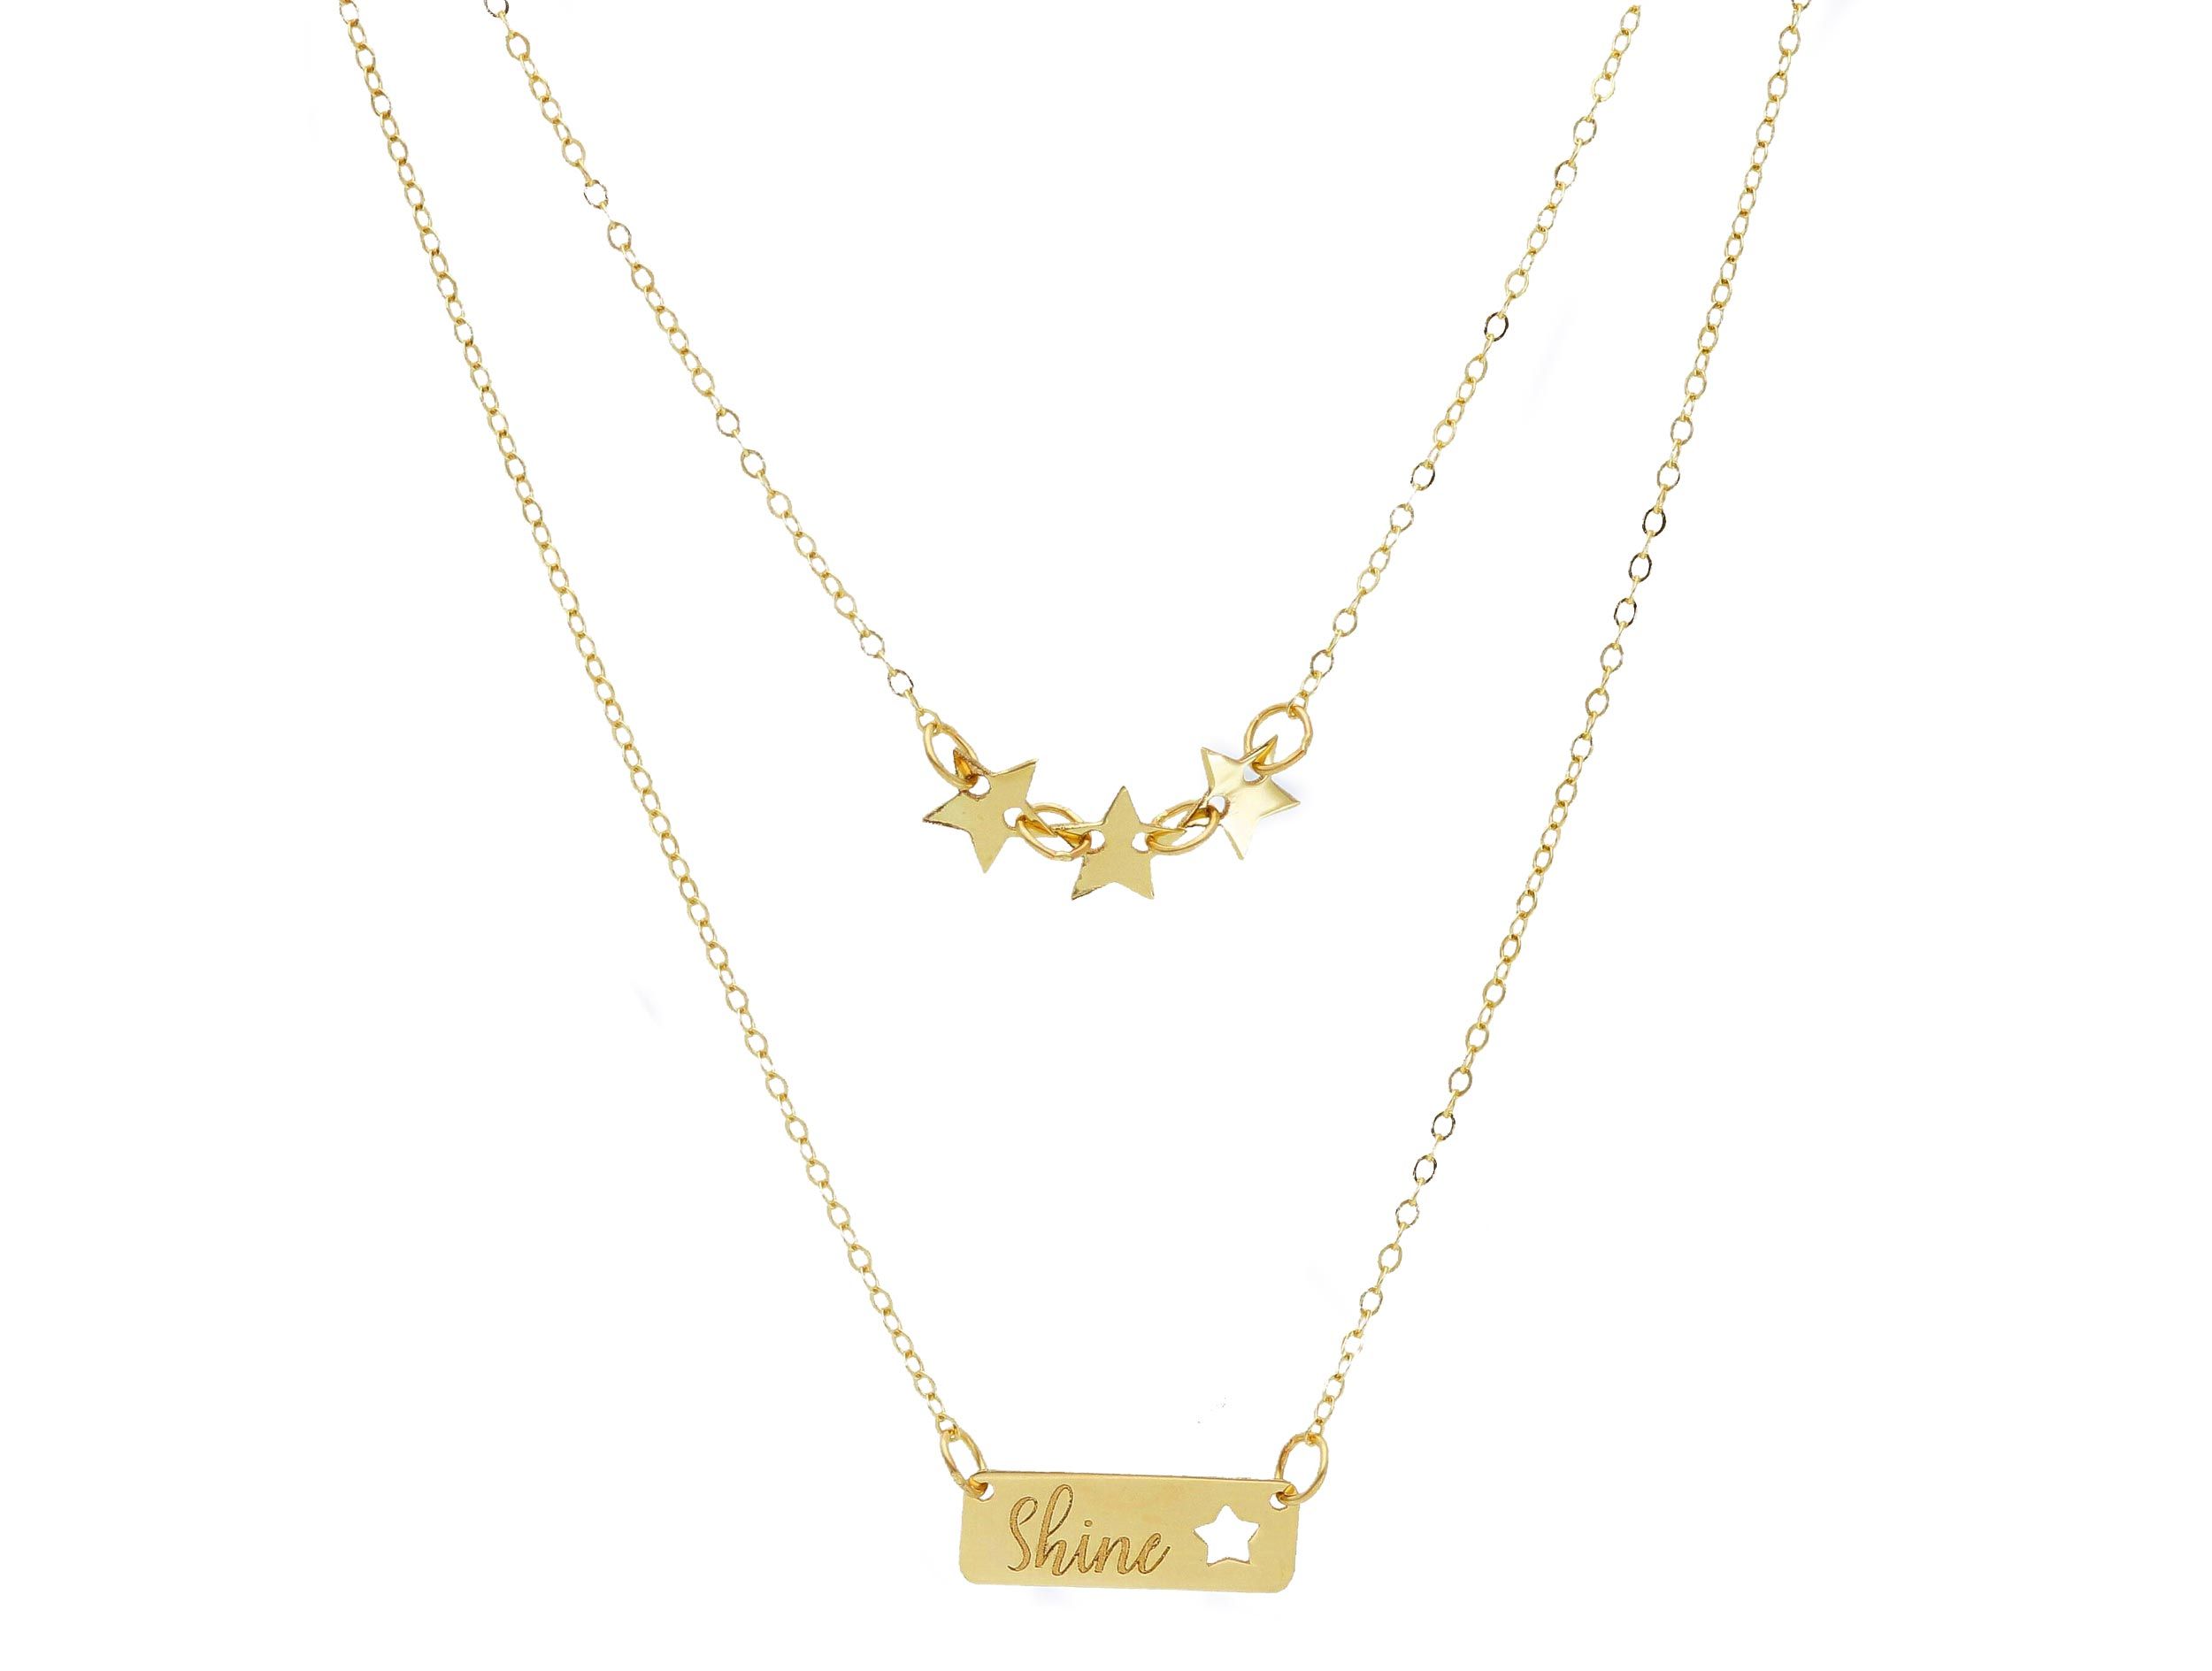 Golden necklace k14 with stars  ( code S252088)